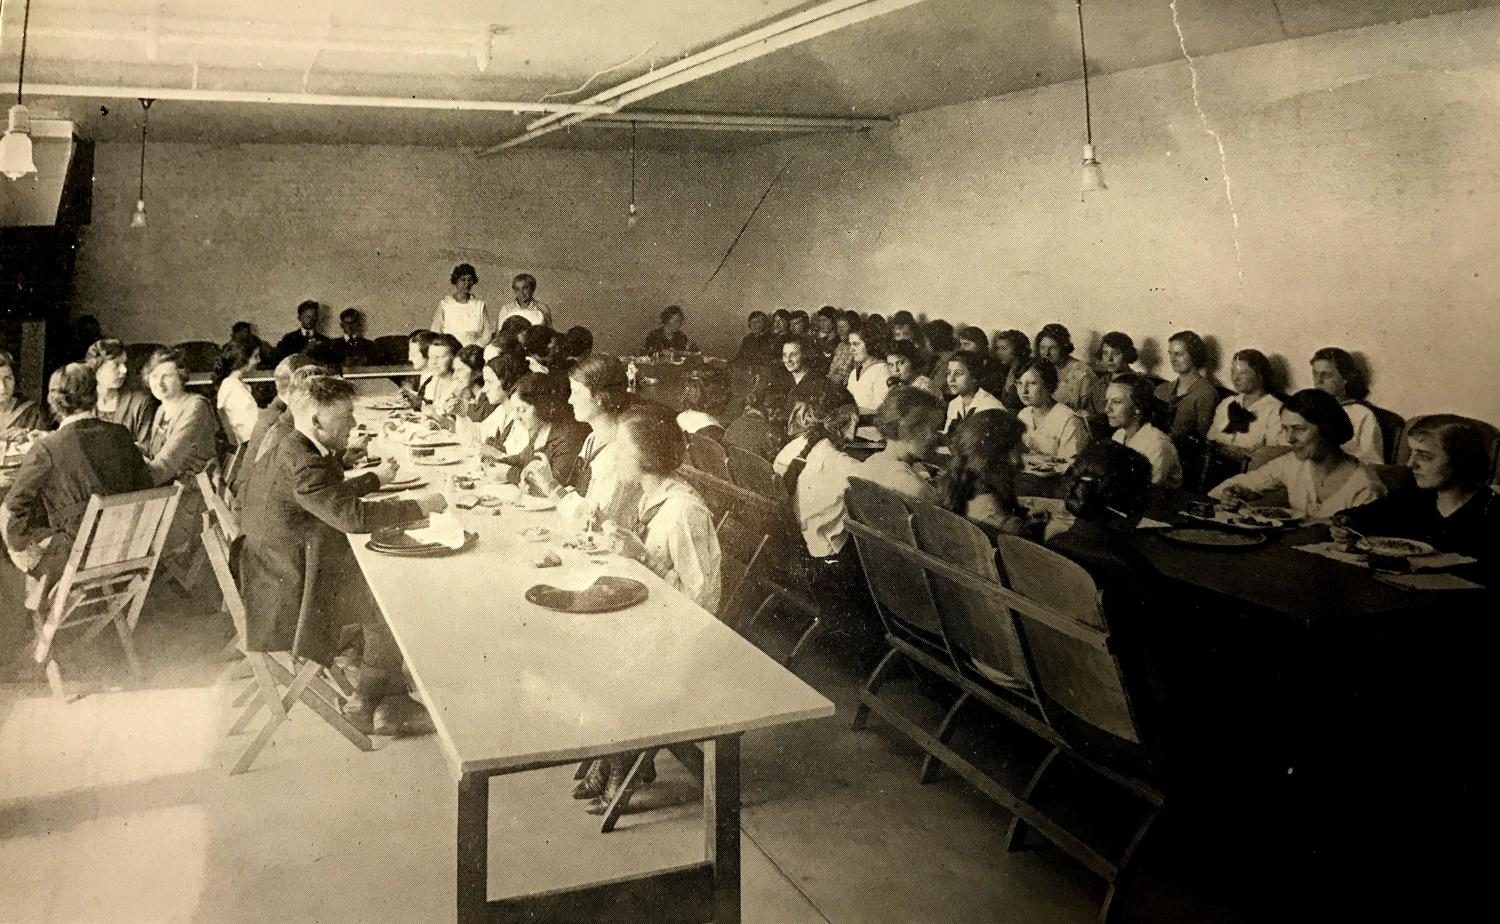 Students enjoy a meal in the basement of the Brainerd building, where the cafeteria was located.